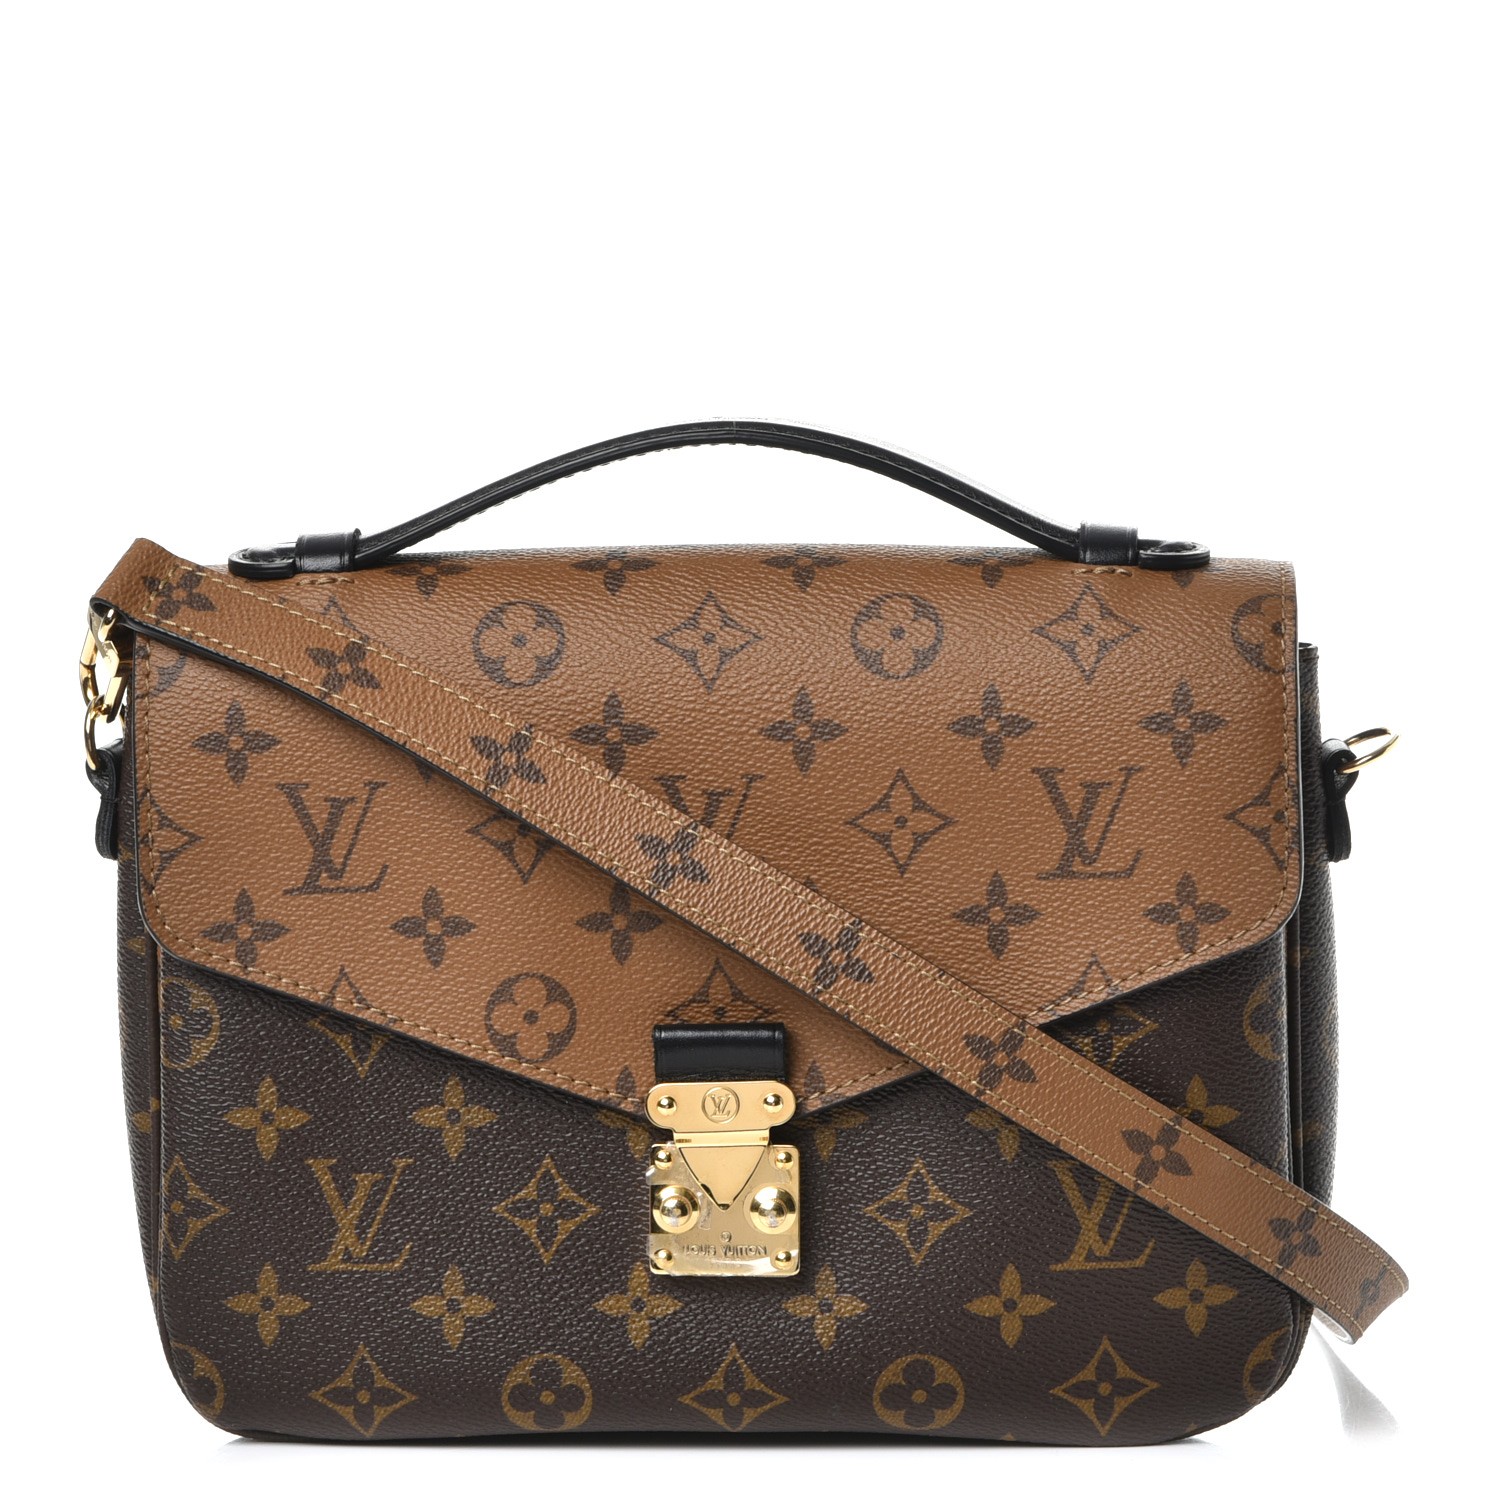 Lv Speedy 25 - clothing & accessories - by owner - apparel sale - craigslist